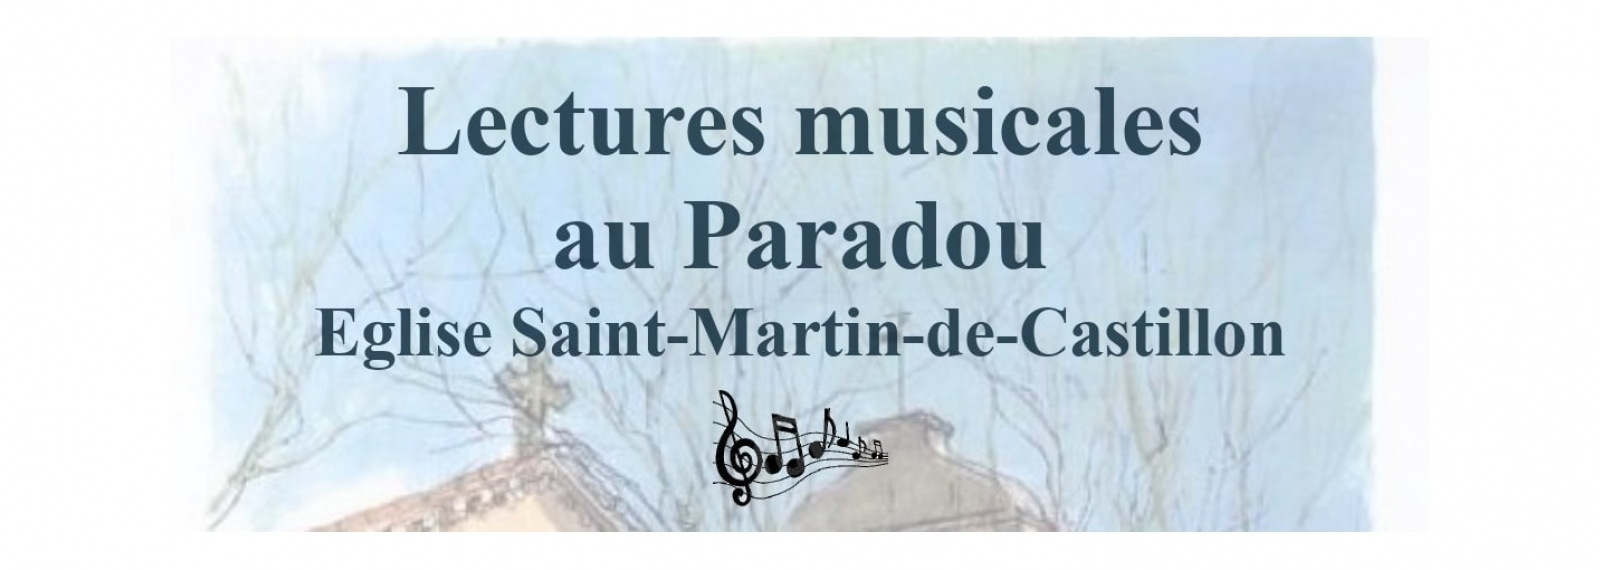 Lectures musicales